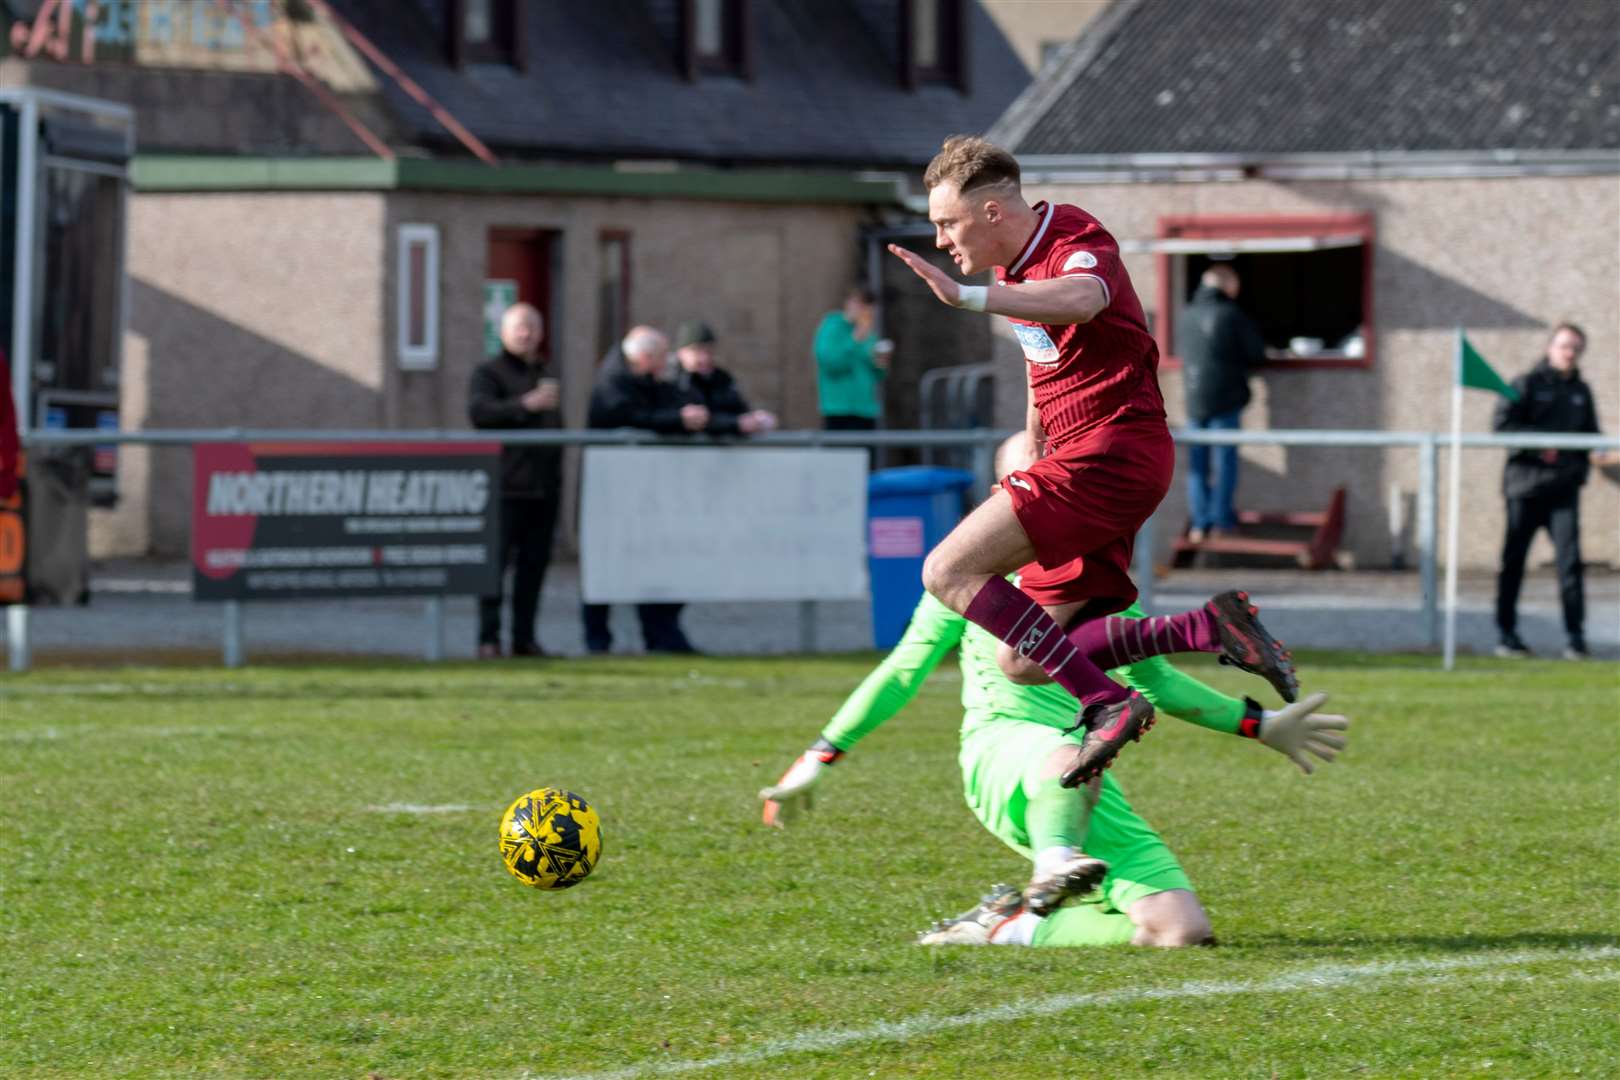 Keith's Gavin Elphinstone leaps over Huntly's Fraser Hobday for an open goal.Keith F.C (1) v Huntly F.C (0) at Kynoch Park, Keith. Highland Football League.Picture: Beth Taylor